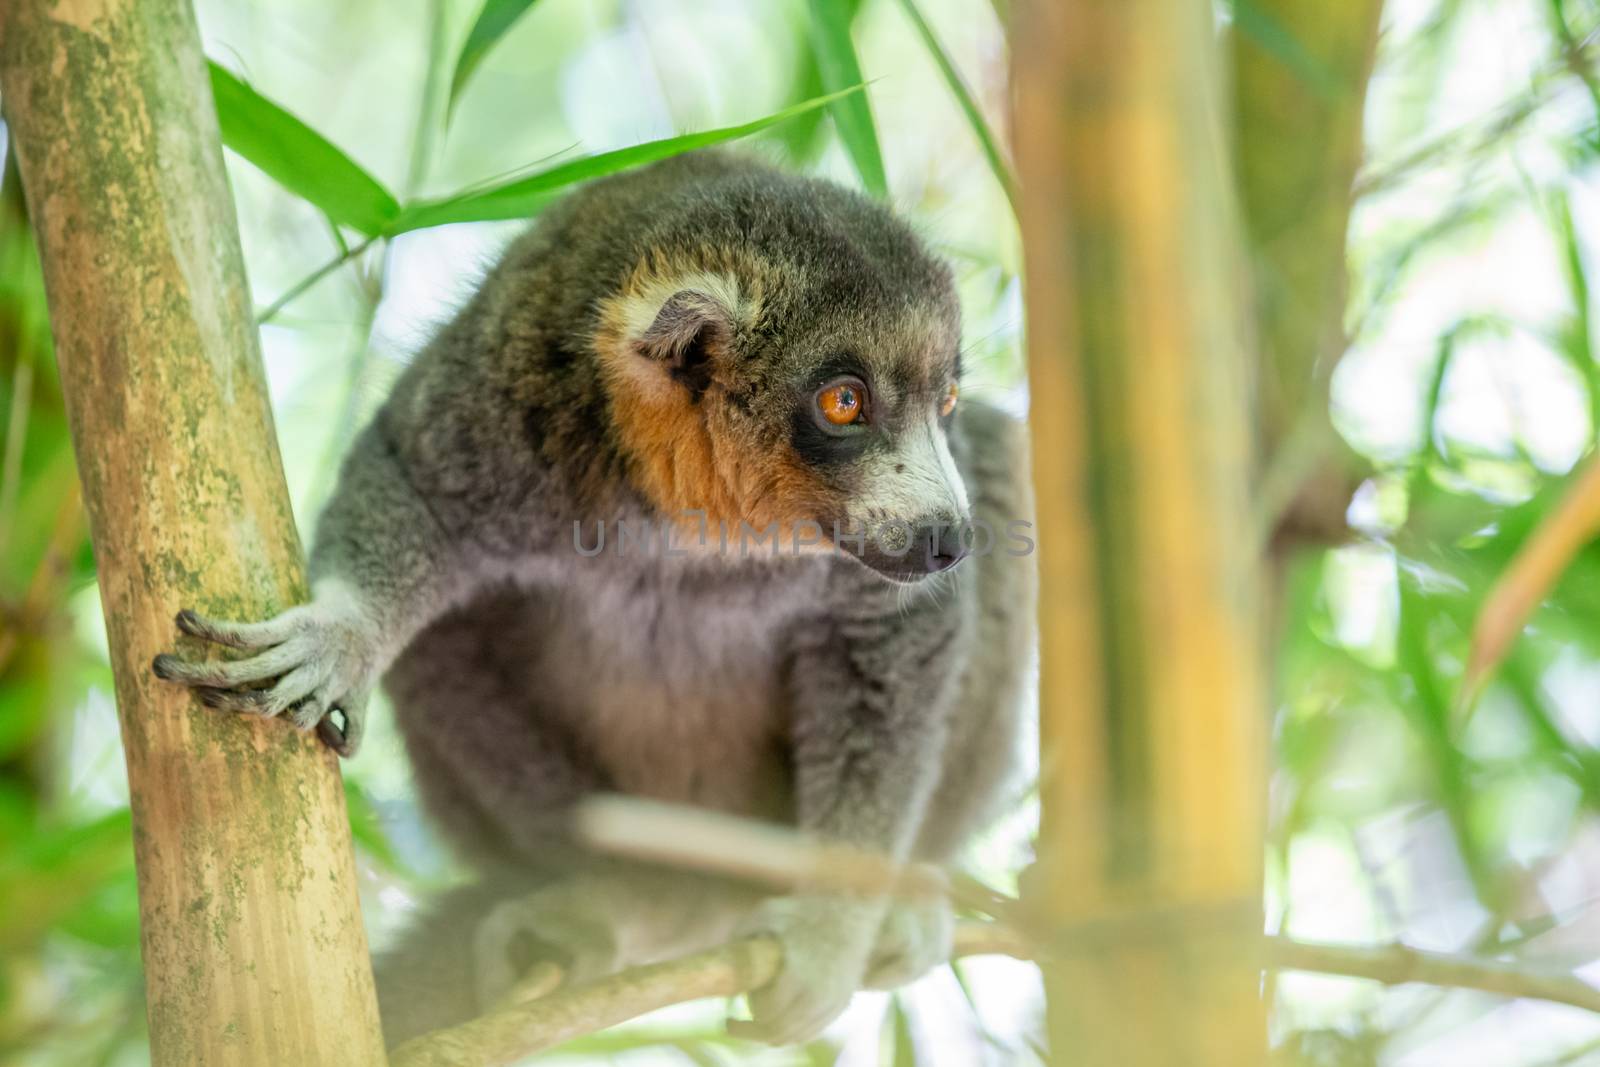 A lemur sits on a branch and watches the visitors to the national park.